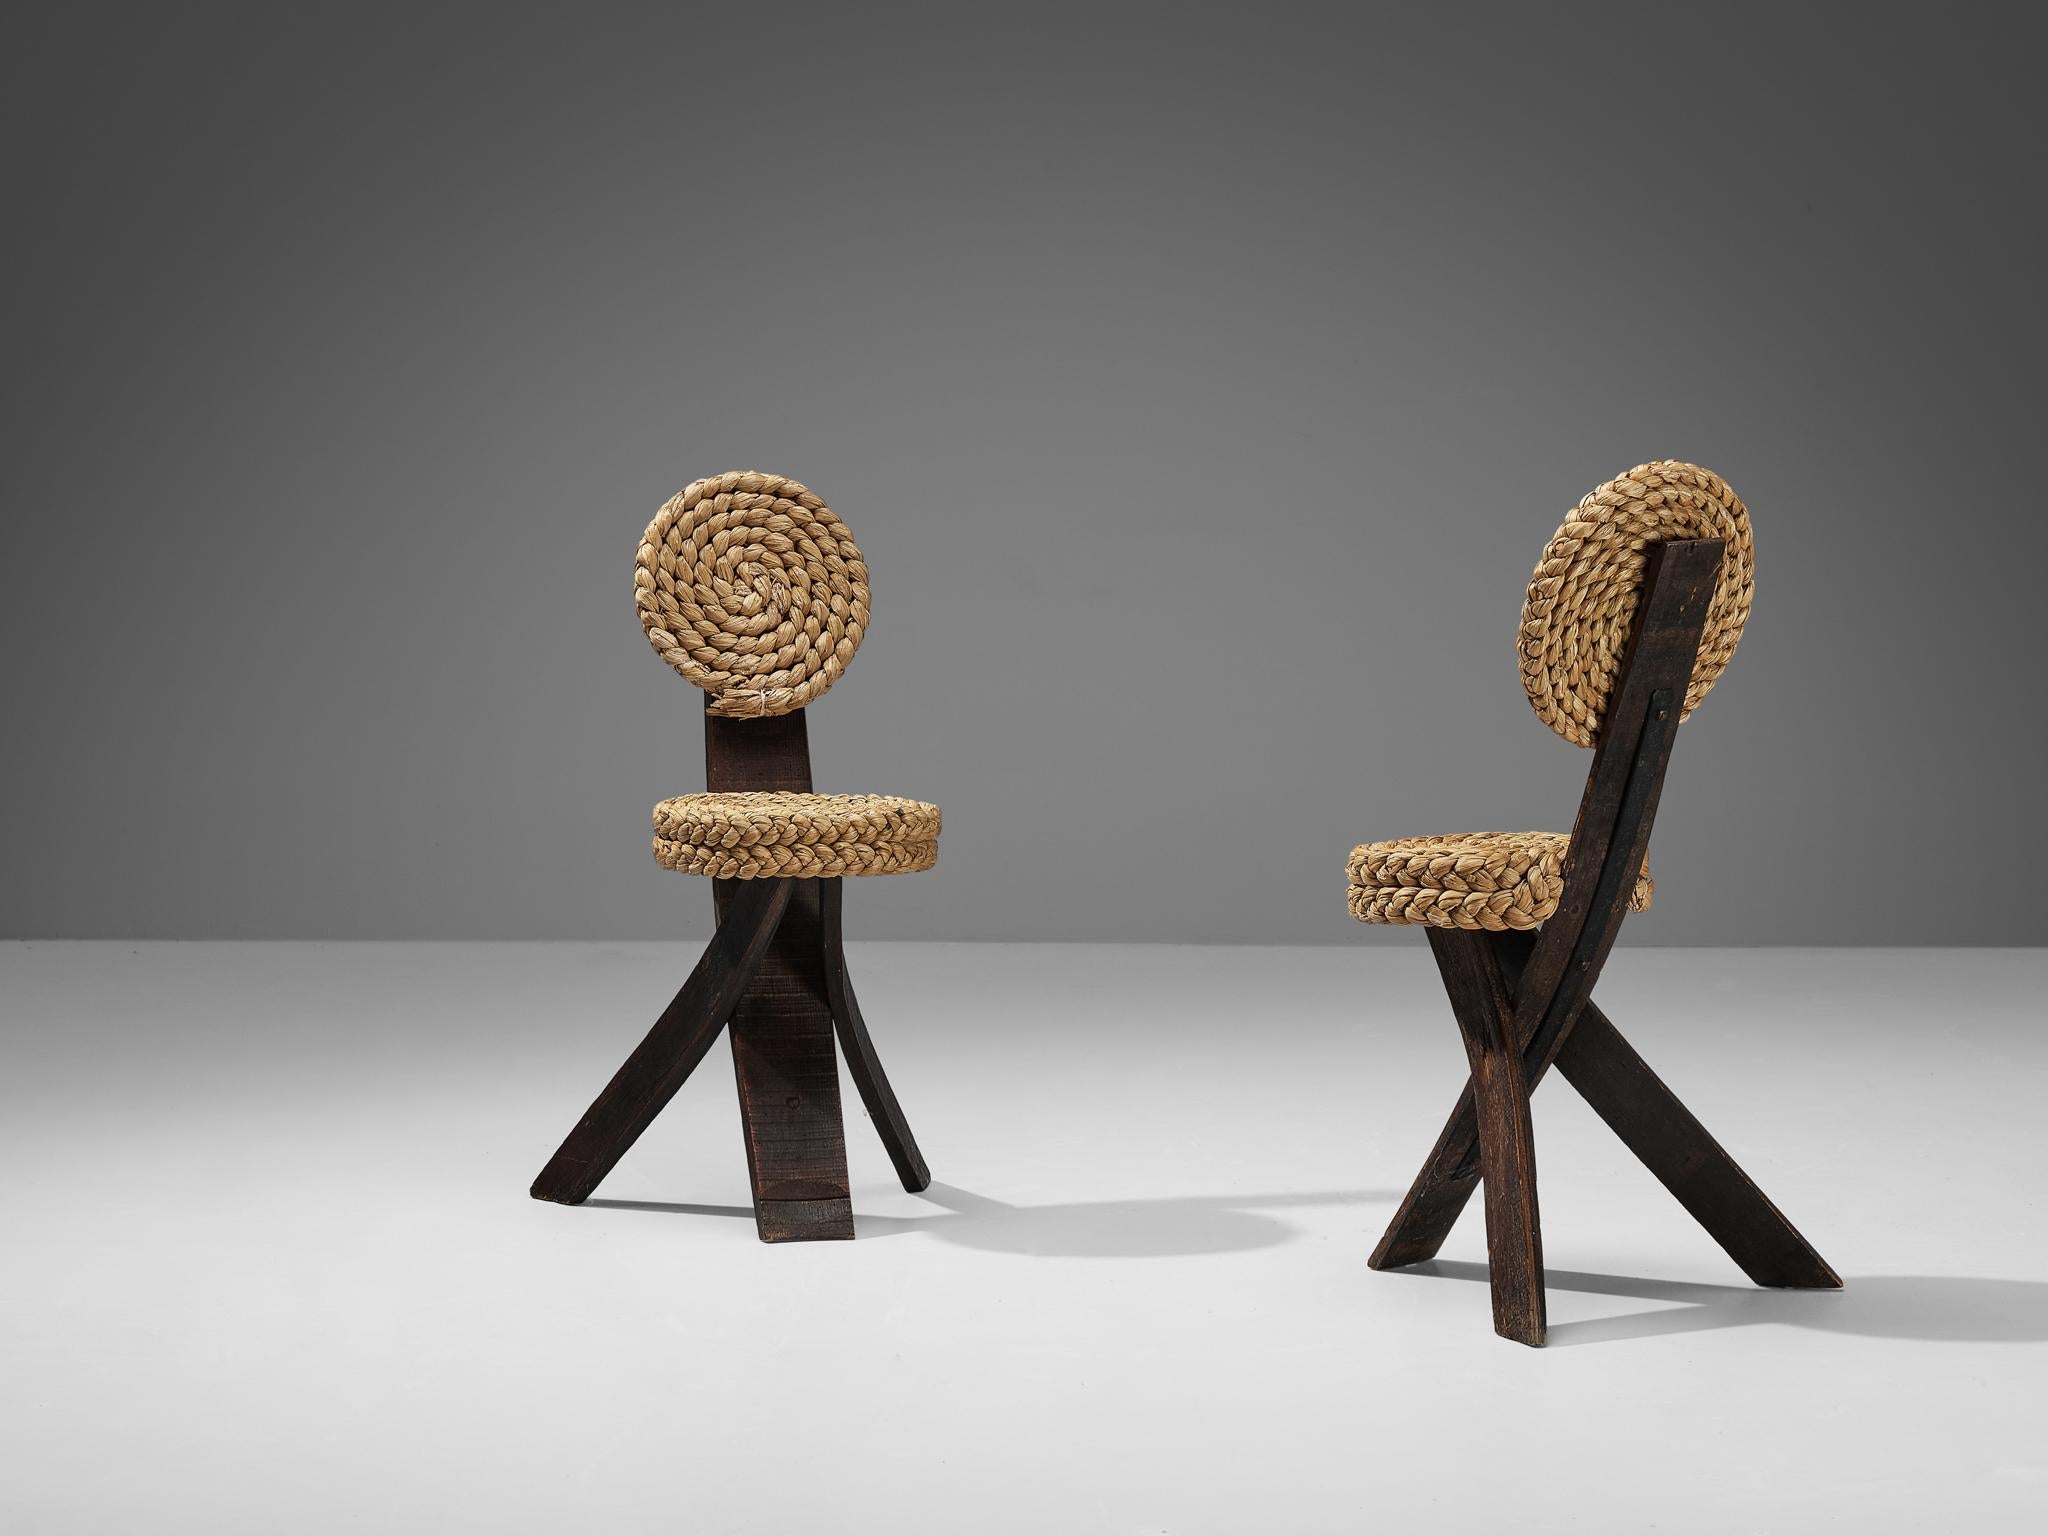 Adrien Audoux and Frida Minet, side chairs, oak, straw, iron, France, 1950s

This sculptural side chair was created by the French designer couple Adrien Audoux and Frida Minet. The three flat legs are made of dark oak. One leg runs upwards and ends